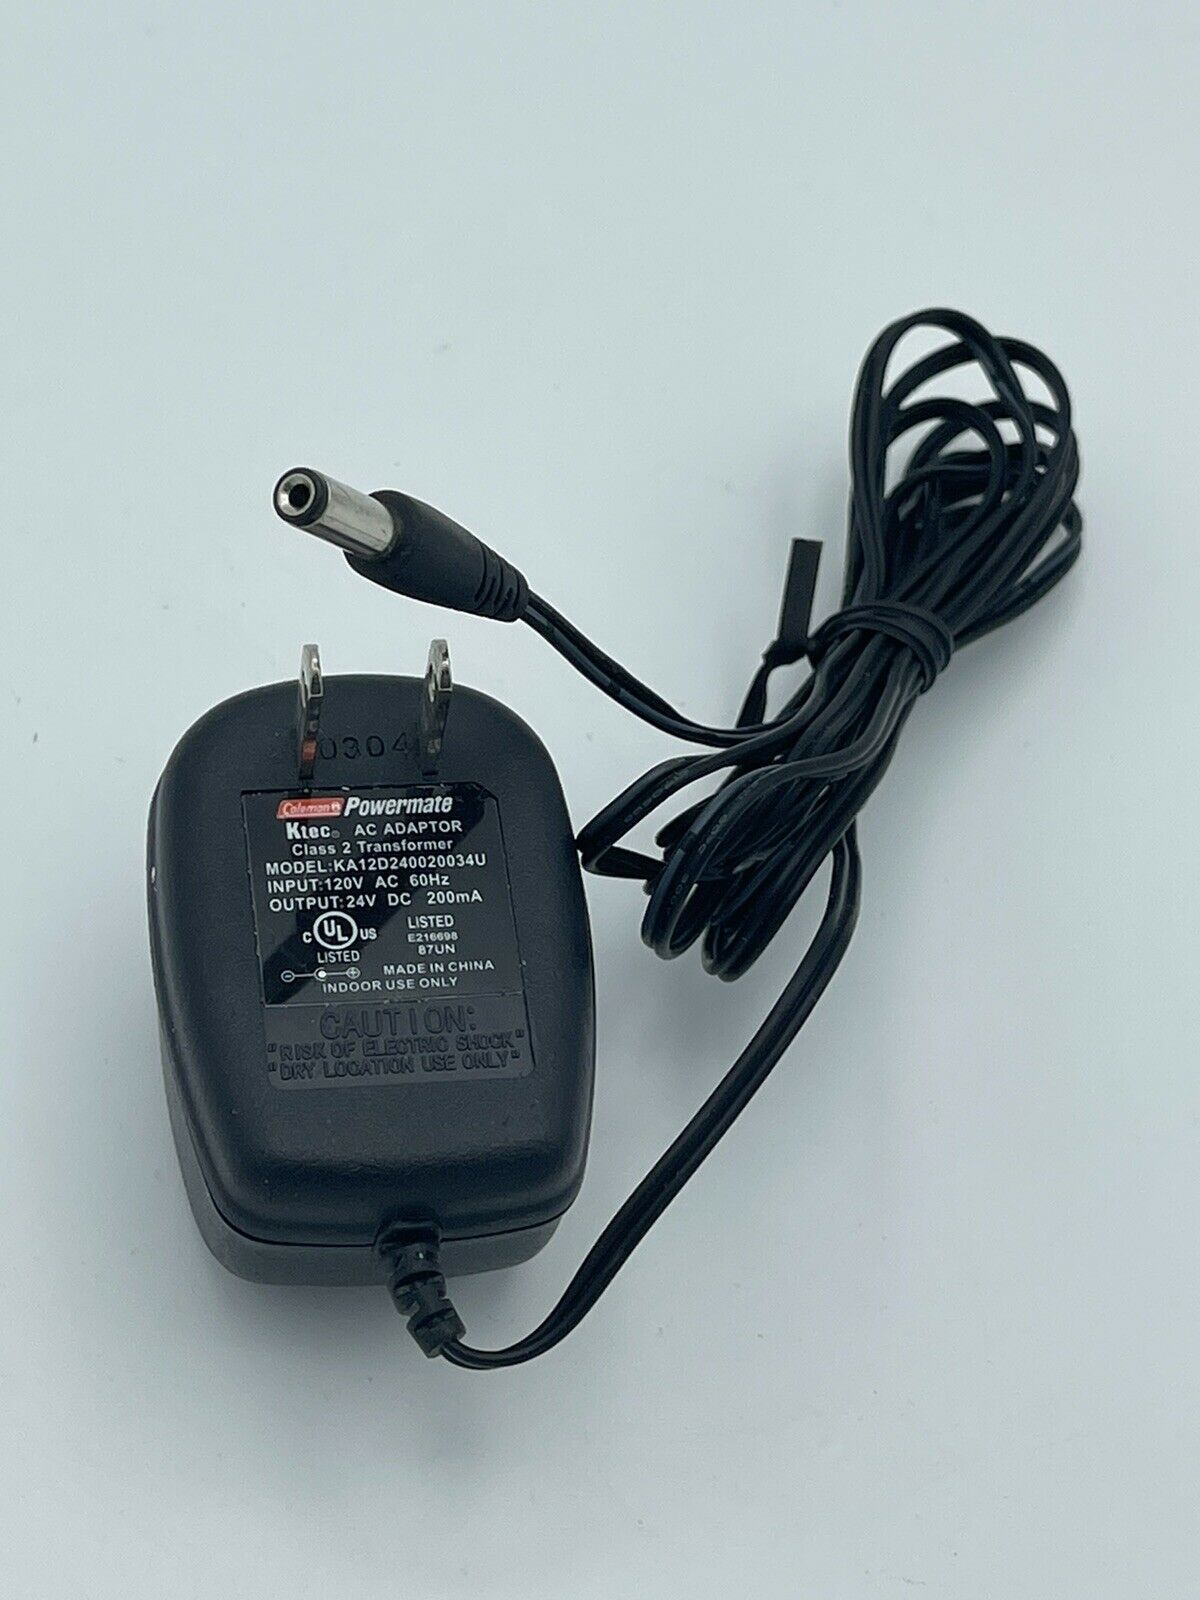 Coleman OEM AC/DC Power Adapter For KA12D240020034U 24v 200ma Brand: Coleman Type: AC/DC Adapter Features: new MPN: